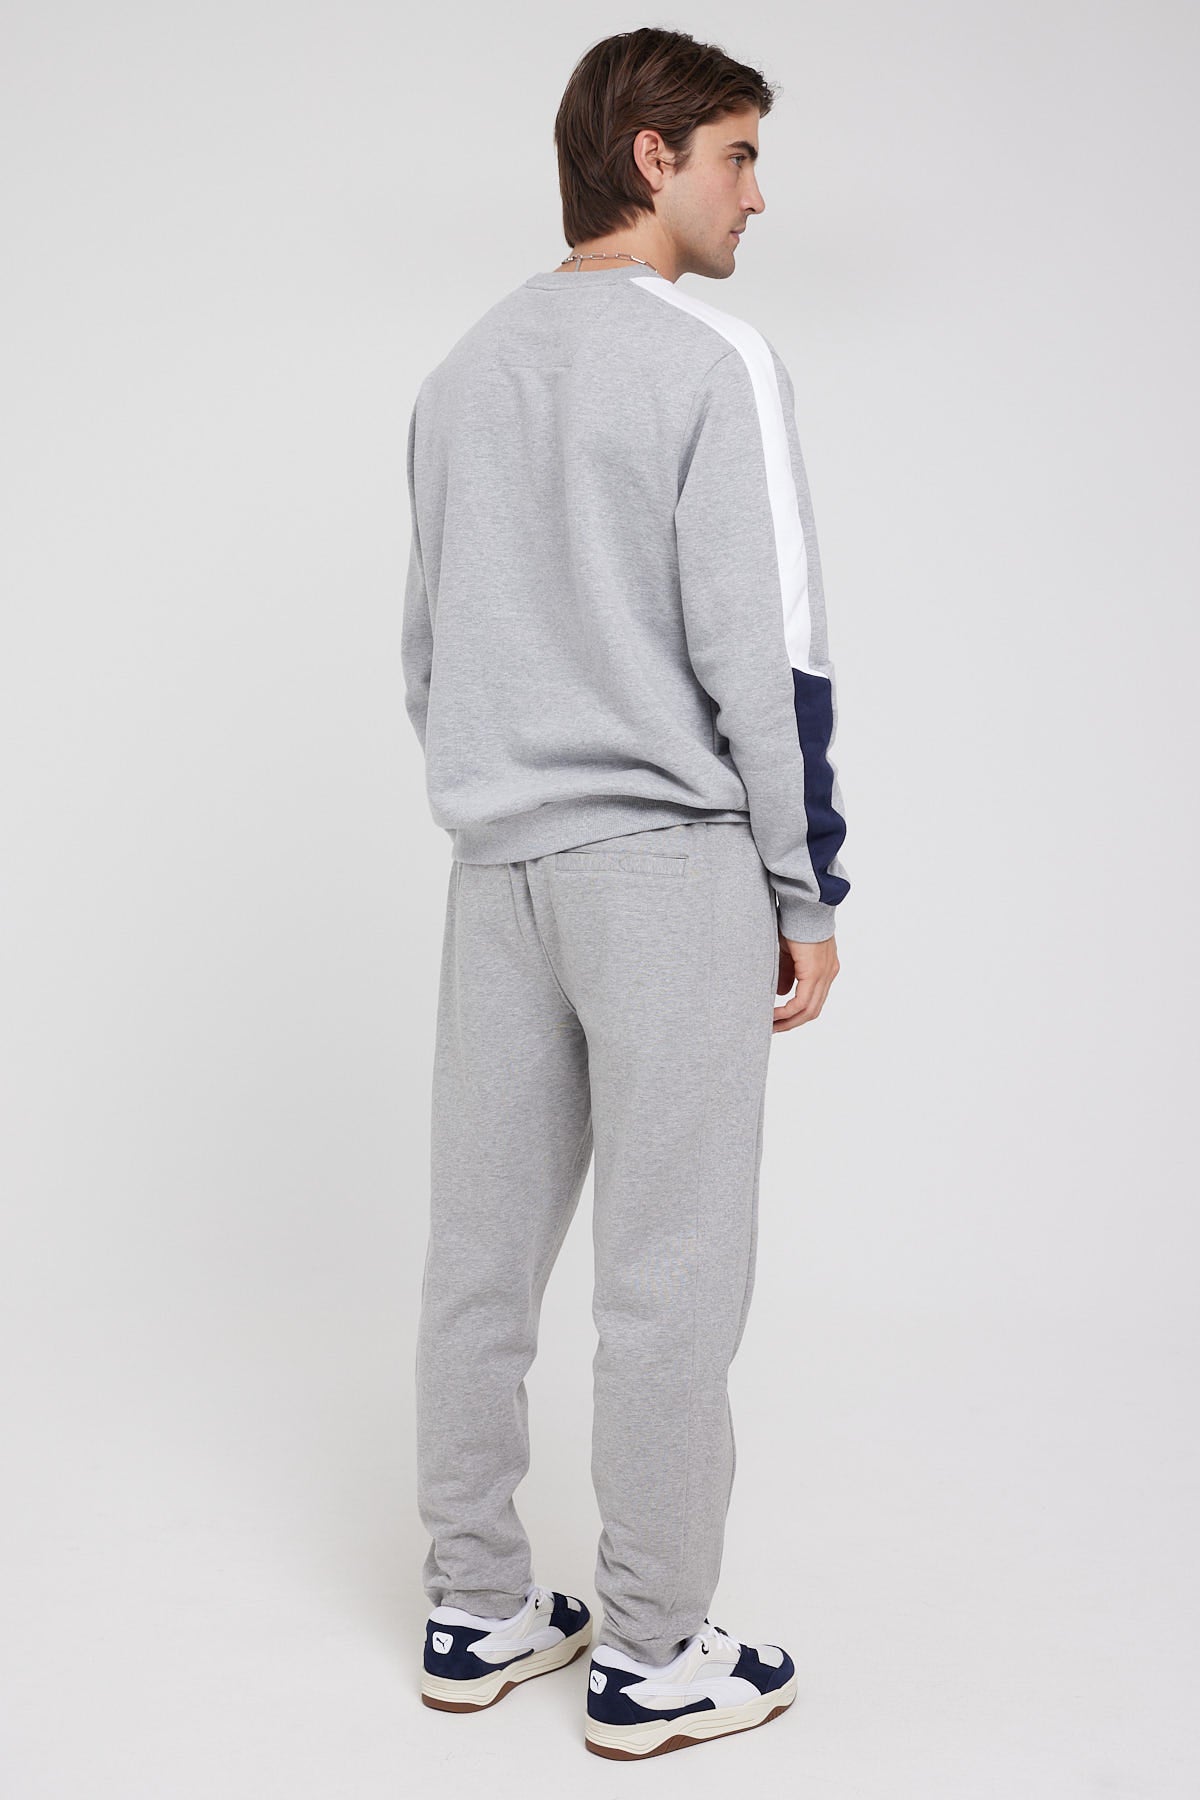 Tommy Jeans TJM Sweatpant – TJ Htr RLX Grey Universal Store Luxe Silver